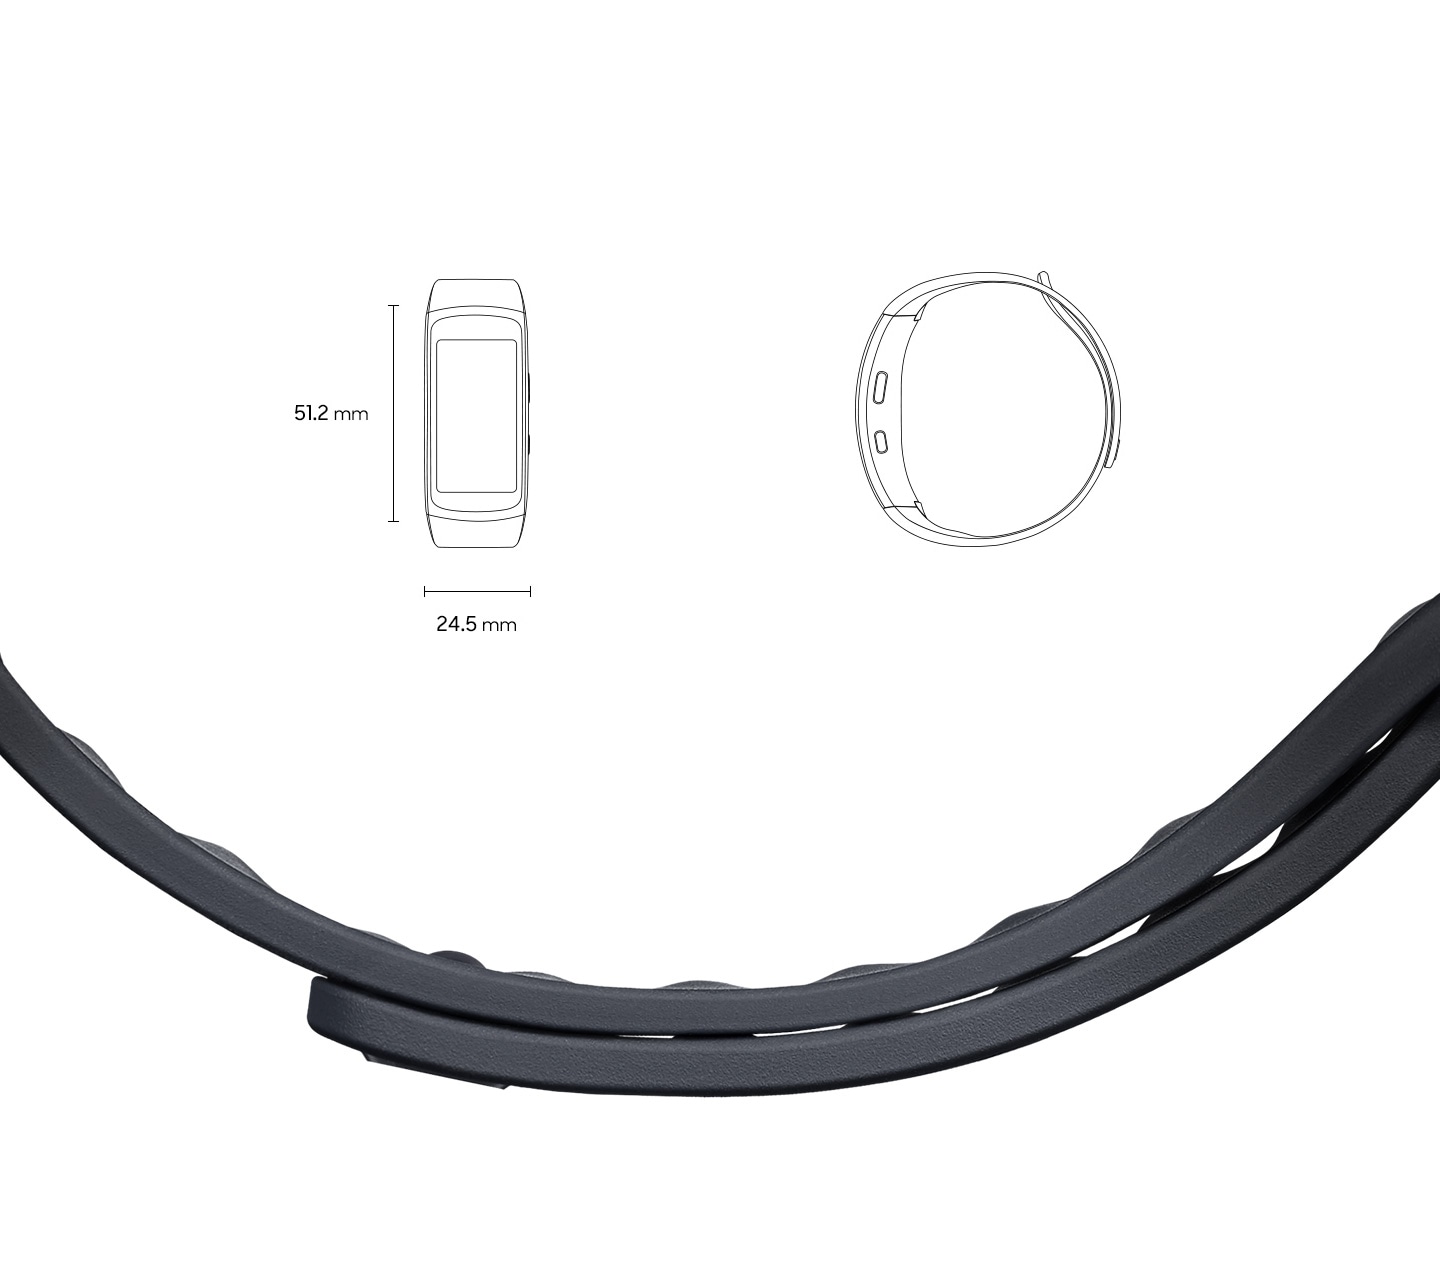 Gear fit2 of size 51.2mm by 24.5mm seen from the front and from the side in small size and large size along with a closeup of the band